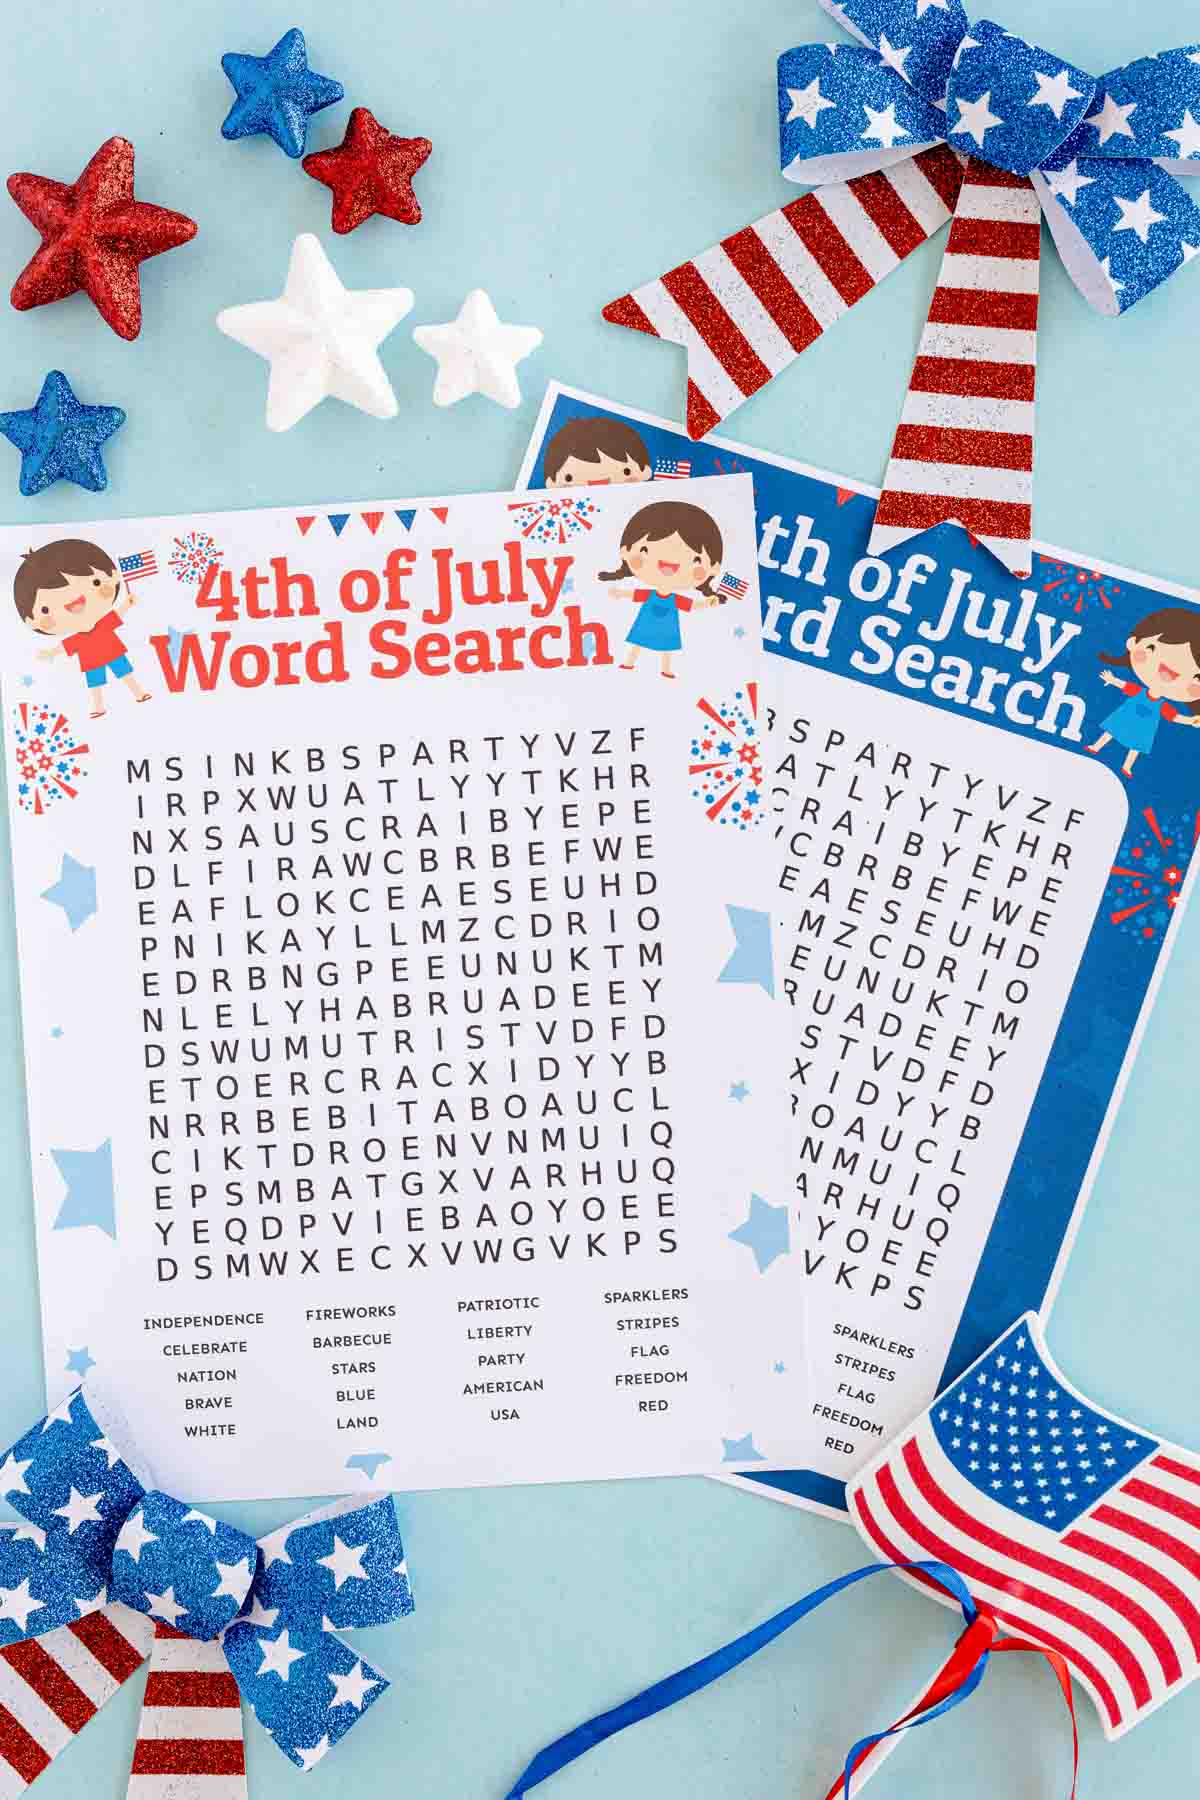 printed out 4th of July word search